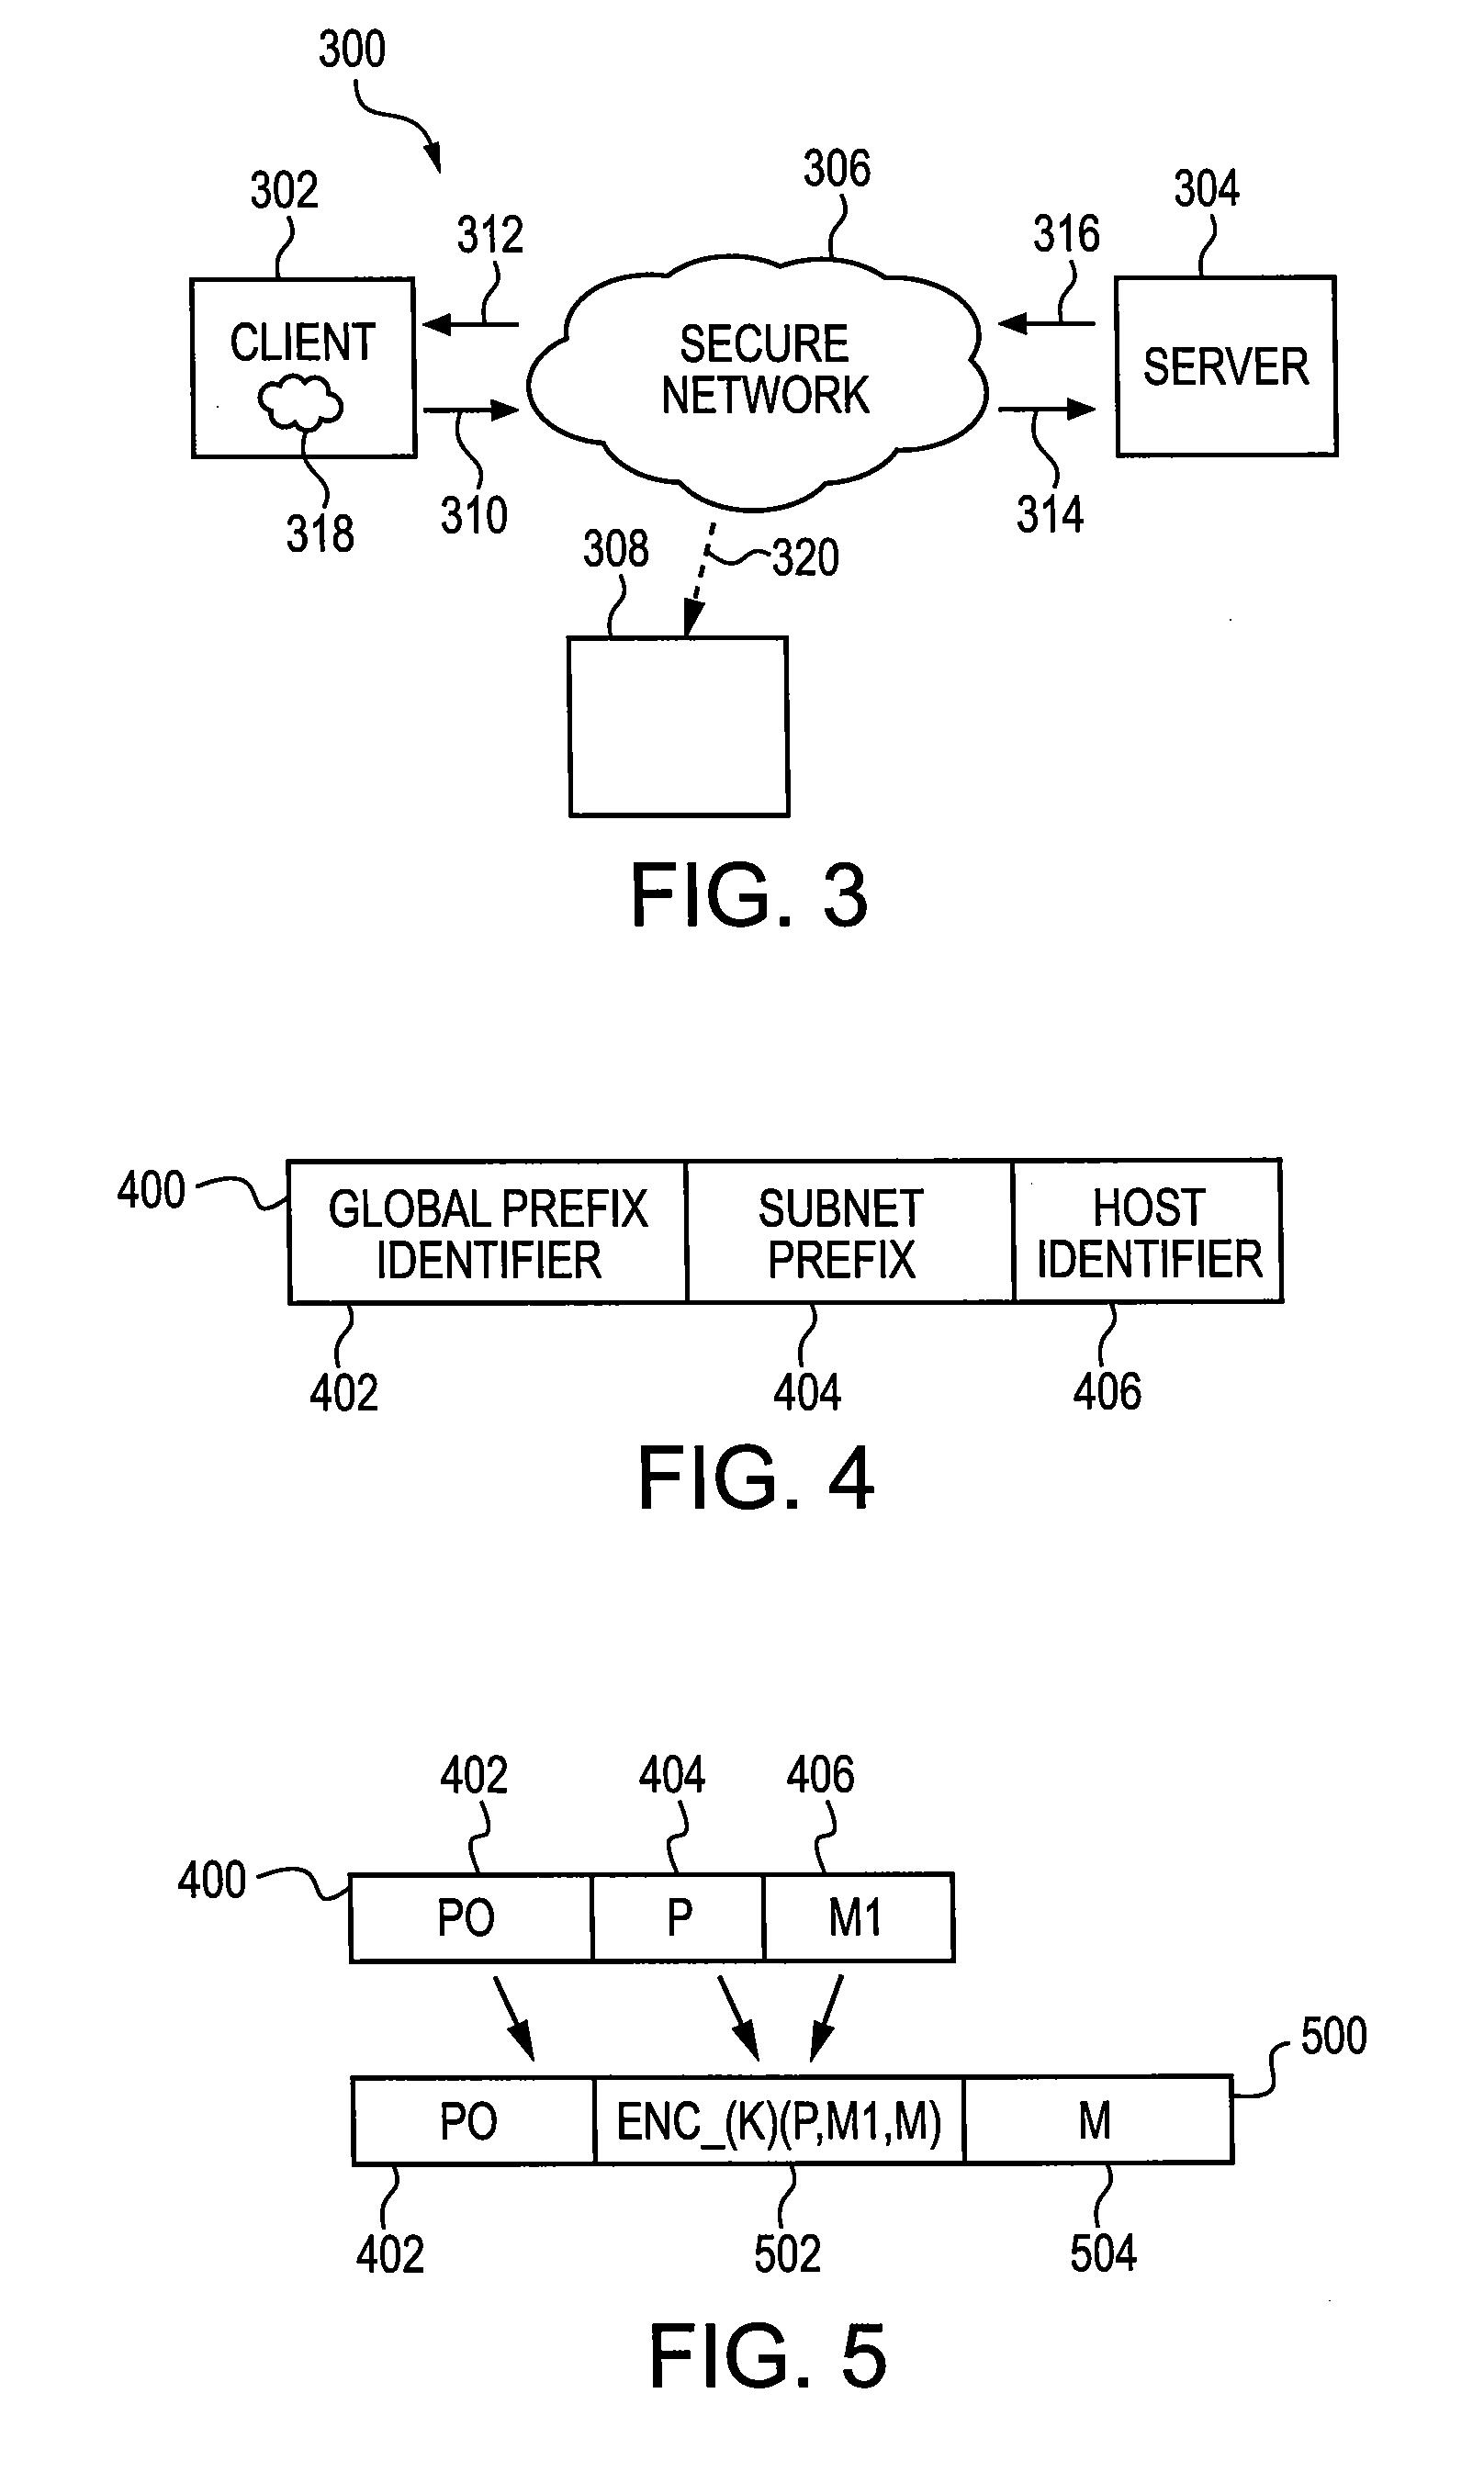 System and Method of Encrypting Network Address for Anonymity and Preventing Data Exfiltration